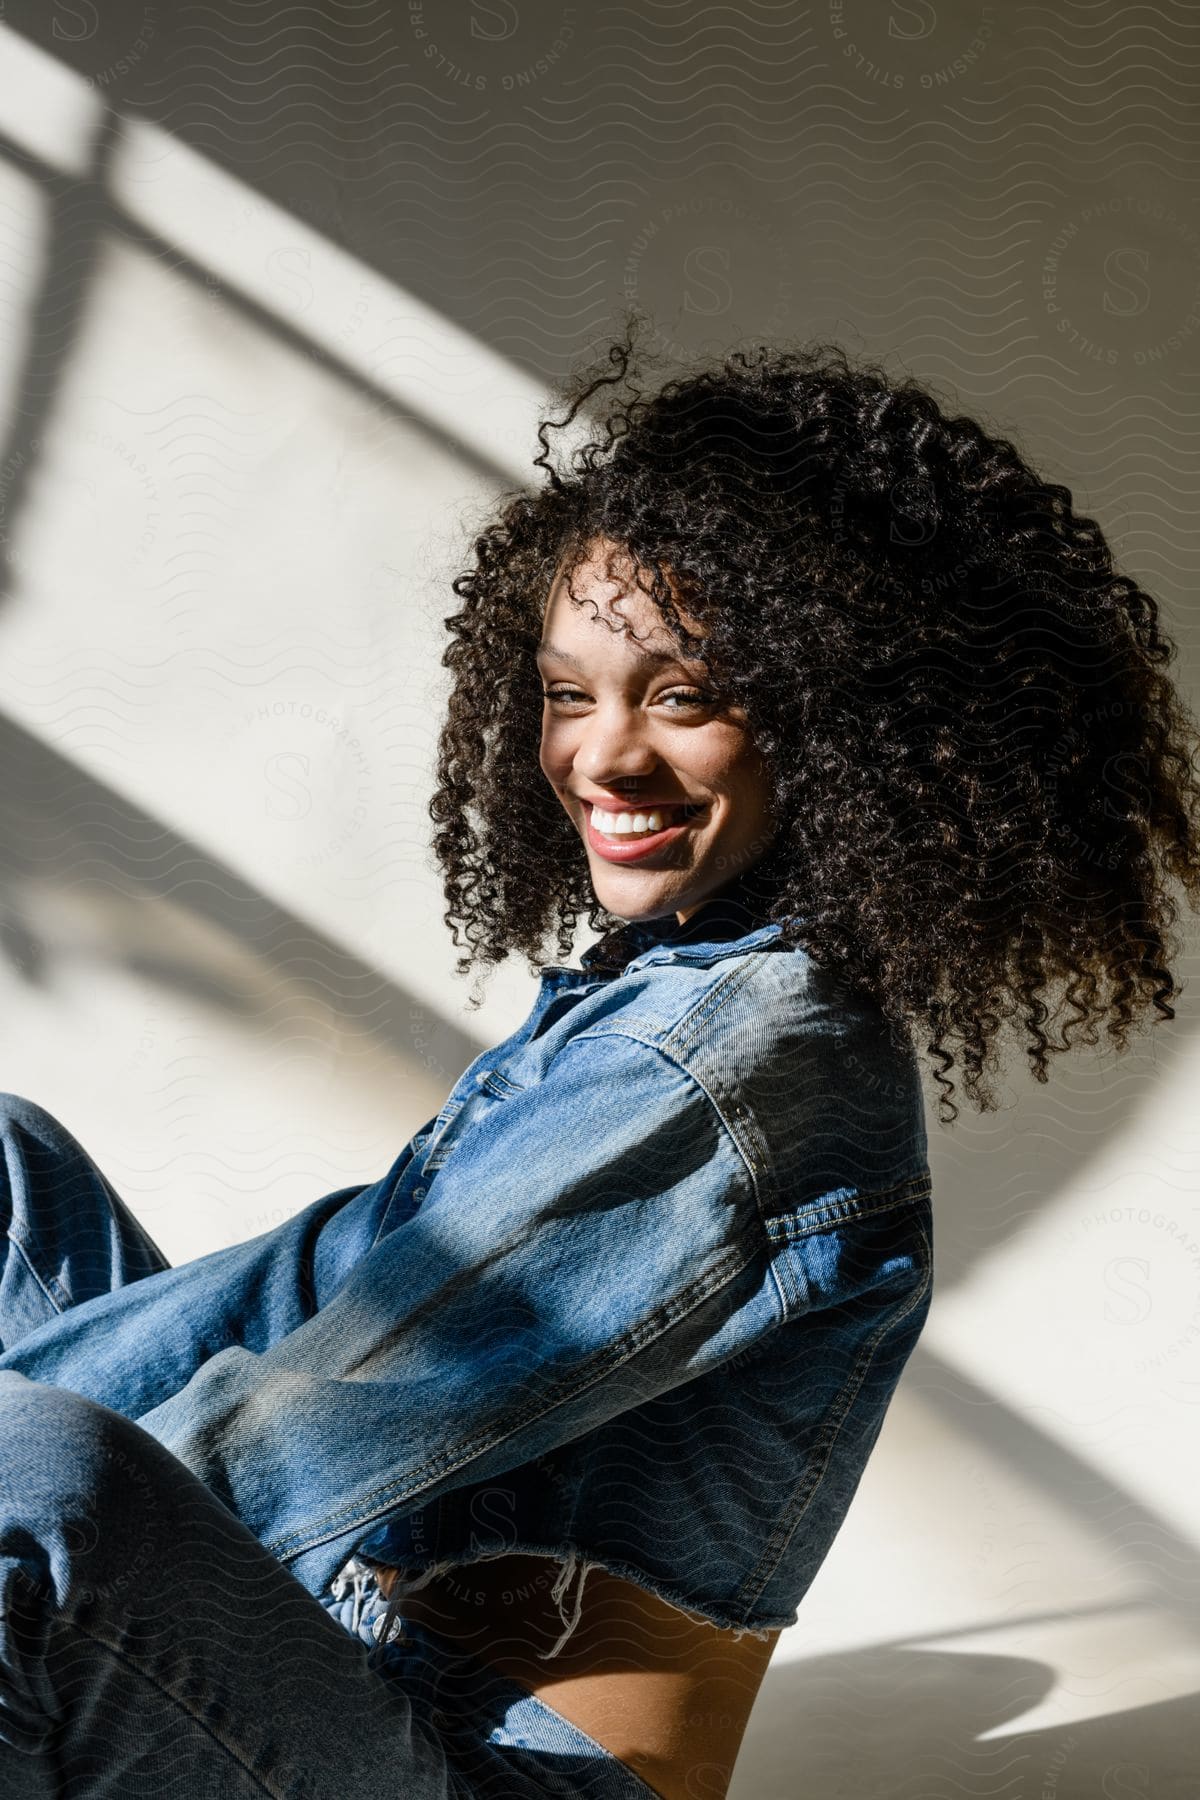 A woman with curly hair is smiling in a room with a concrete wall and is wearing jeans while the sunlight casts shadows on the wall in the background